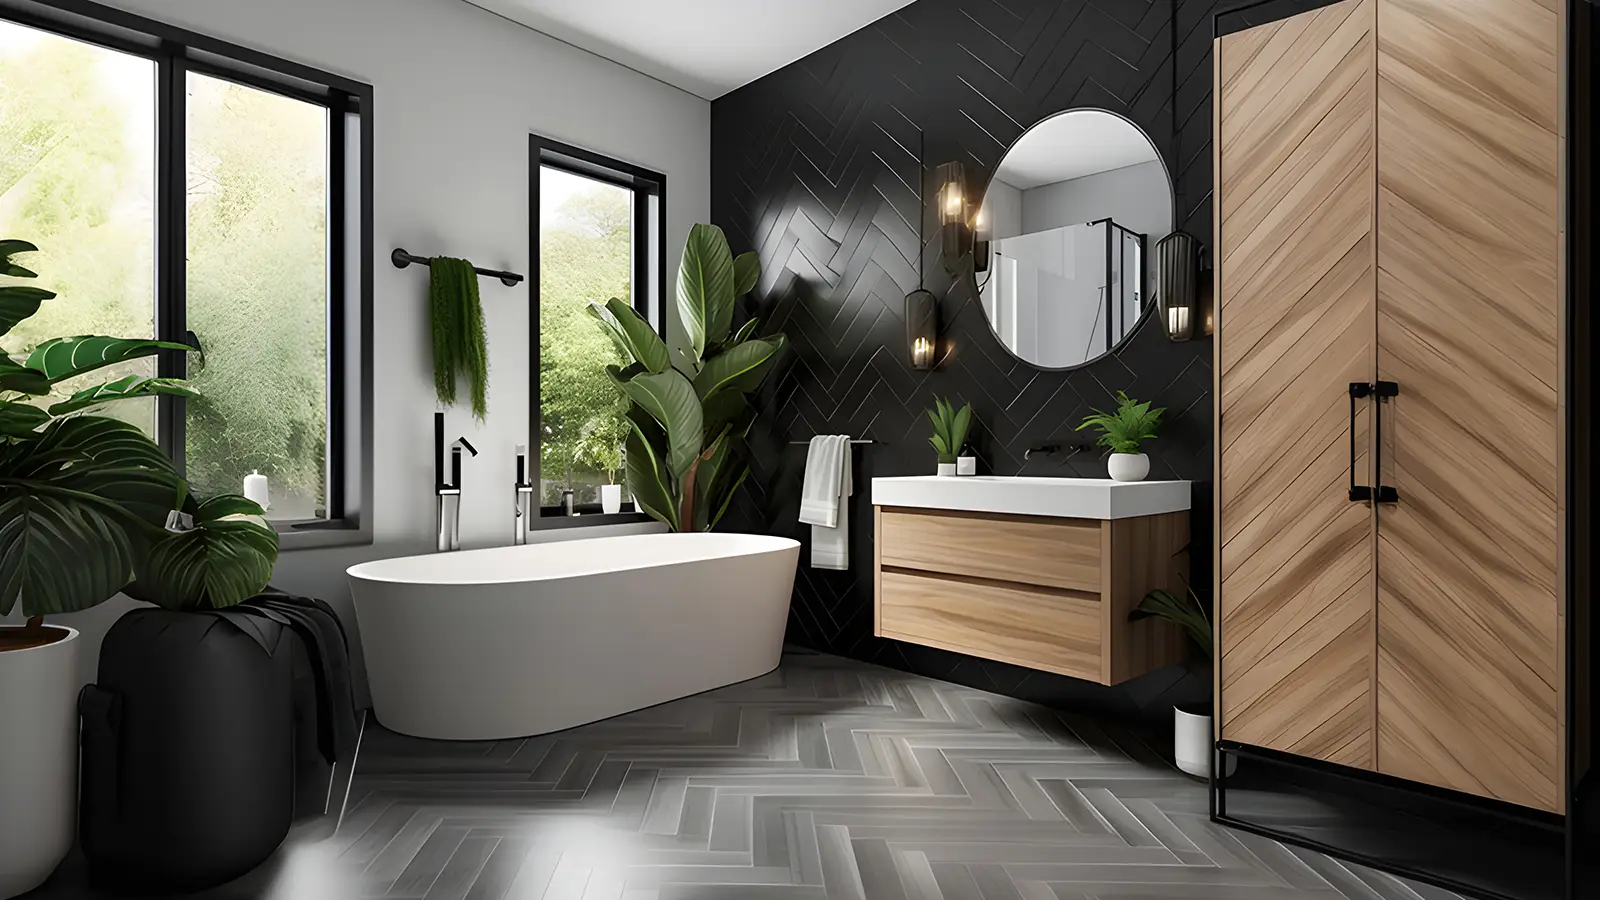 A black and white bathroom with plants and a tub.